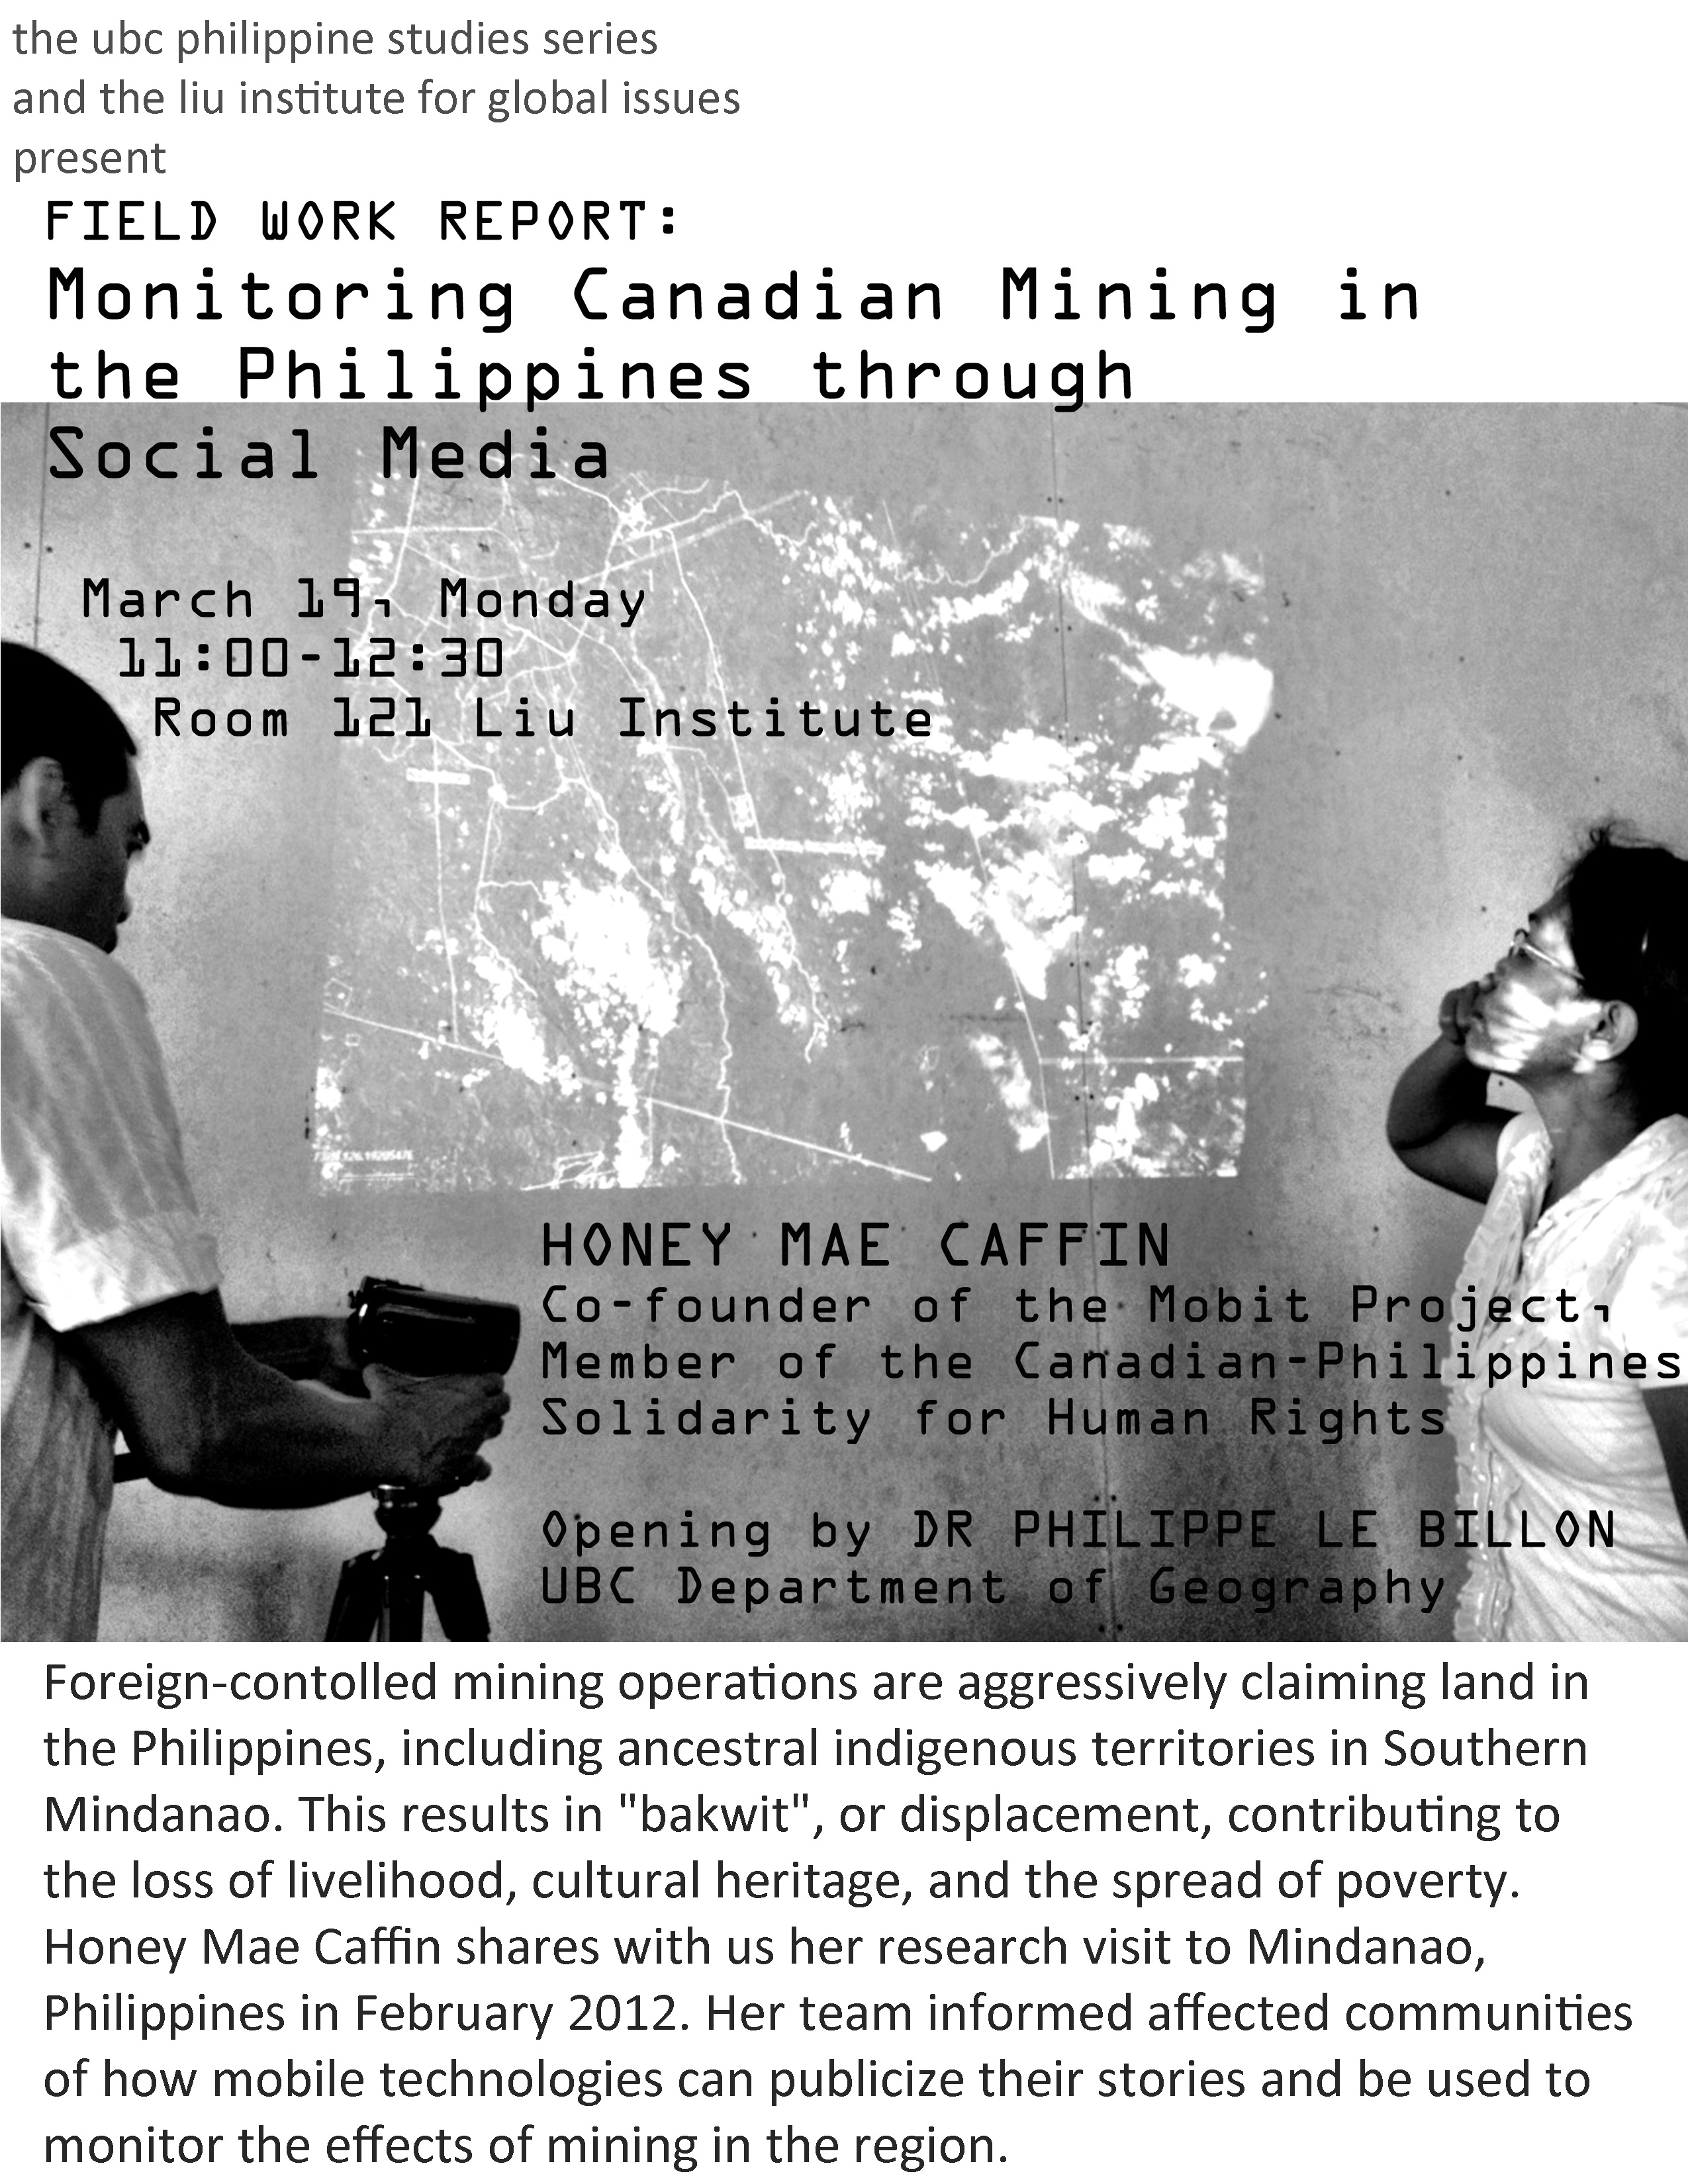 march-19-usapan-2-monitoring-canadian-mining-in-the-philippines